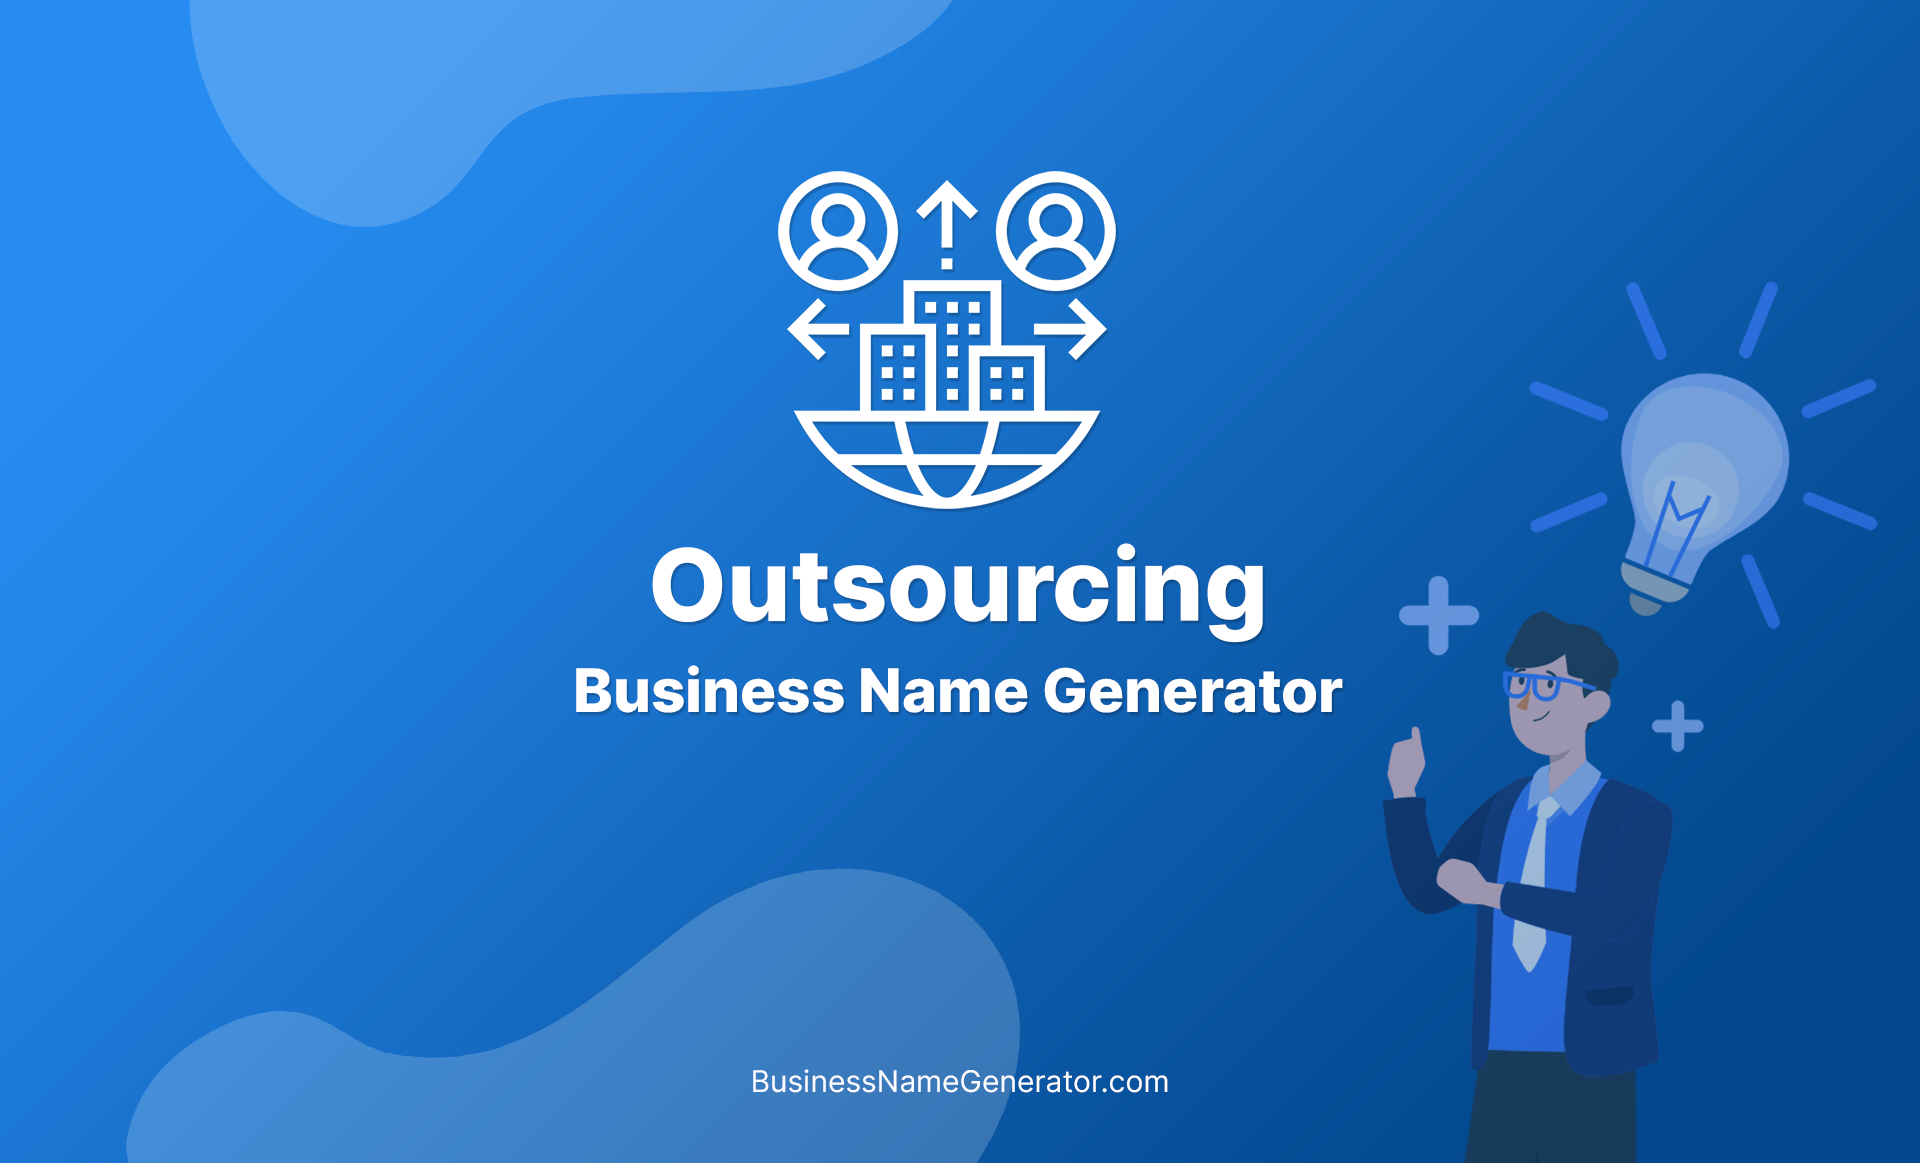 Outsourcing Business Name Generator